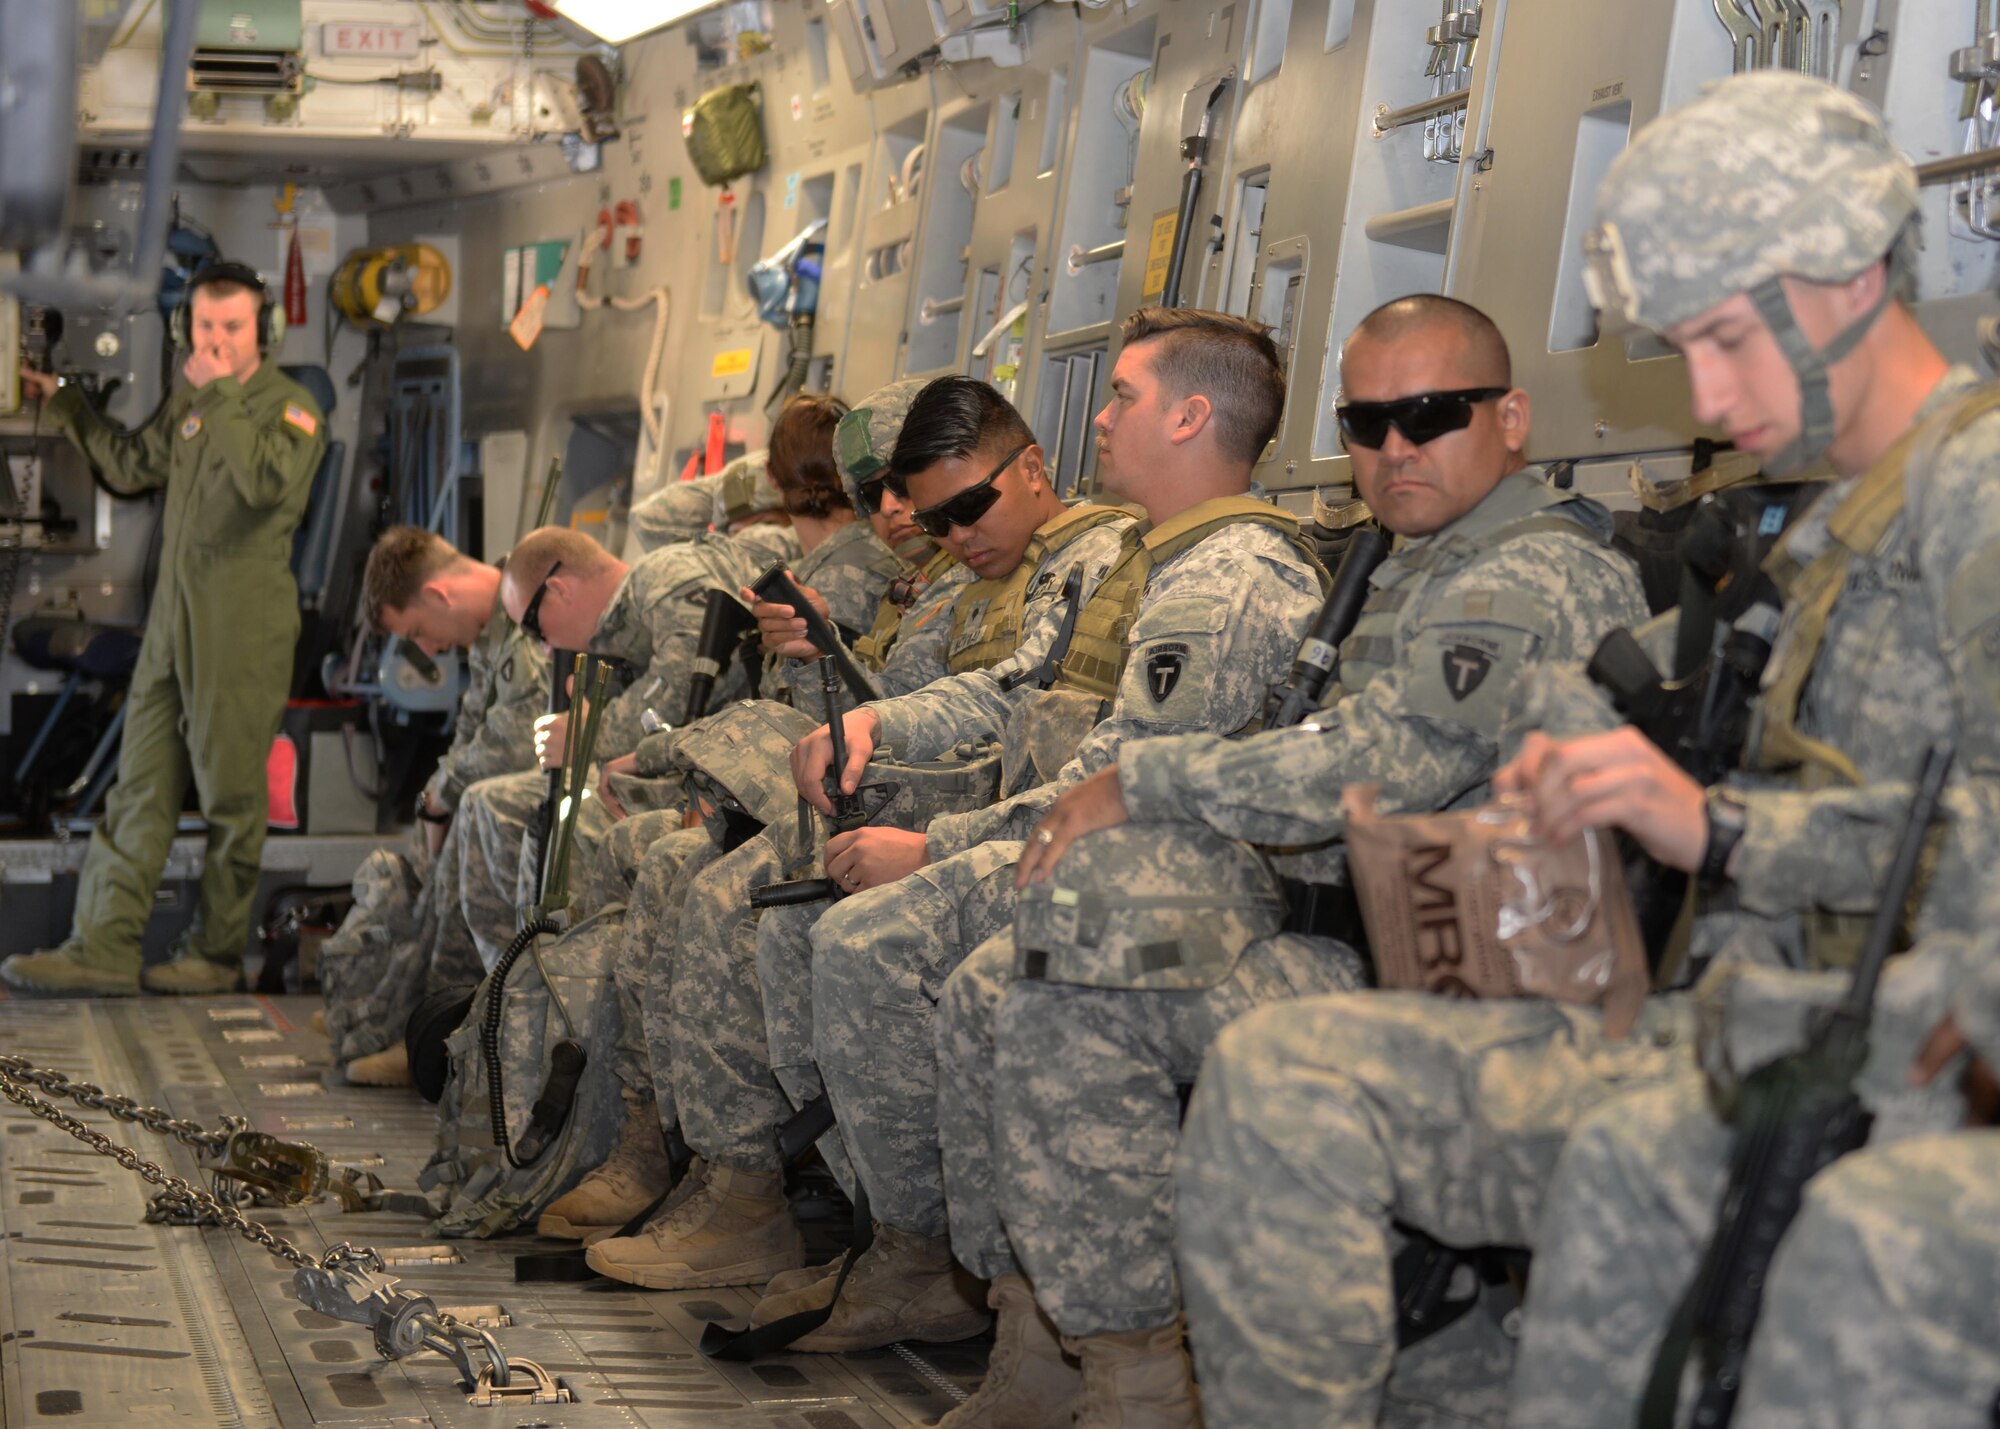 Soldiers prepare for takeoff in an Air Force C-17 Globemaster III March 27, 2015, on the flightline during Operation Viking at Austin Bergstrom International Airport, Texas. Soldiers with the 1st Battalion (Airborne), 143rd Infantry Regiment participated in the air-landing exercise, which included setting up security, room clearing procedures and a mortar attack. (U.S. Air Force photo/Senior Airman J. Zuriel Lee)